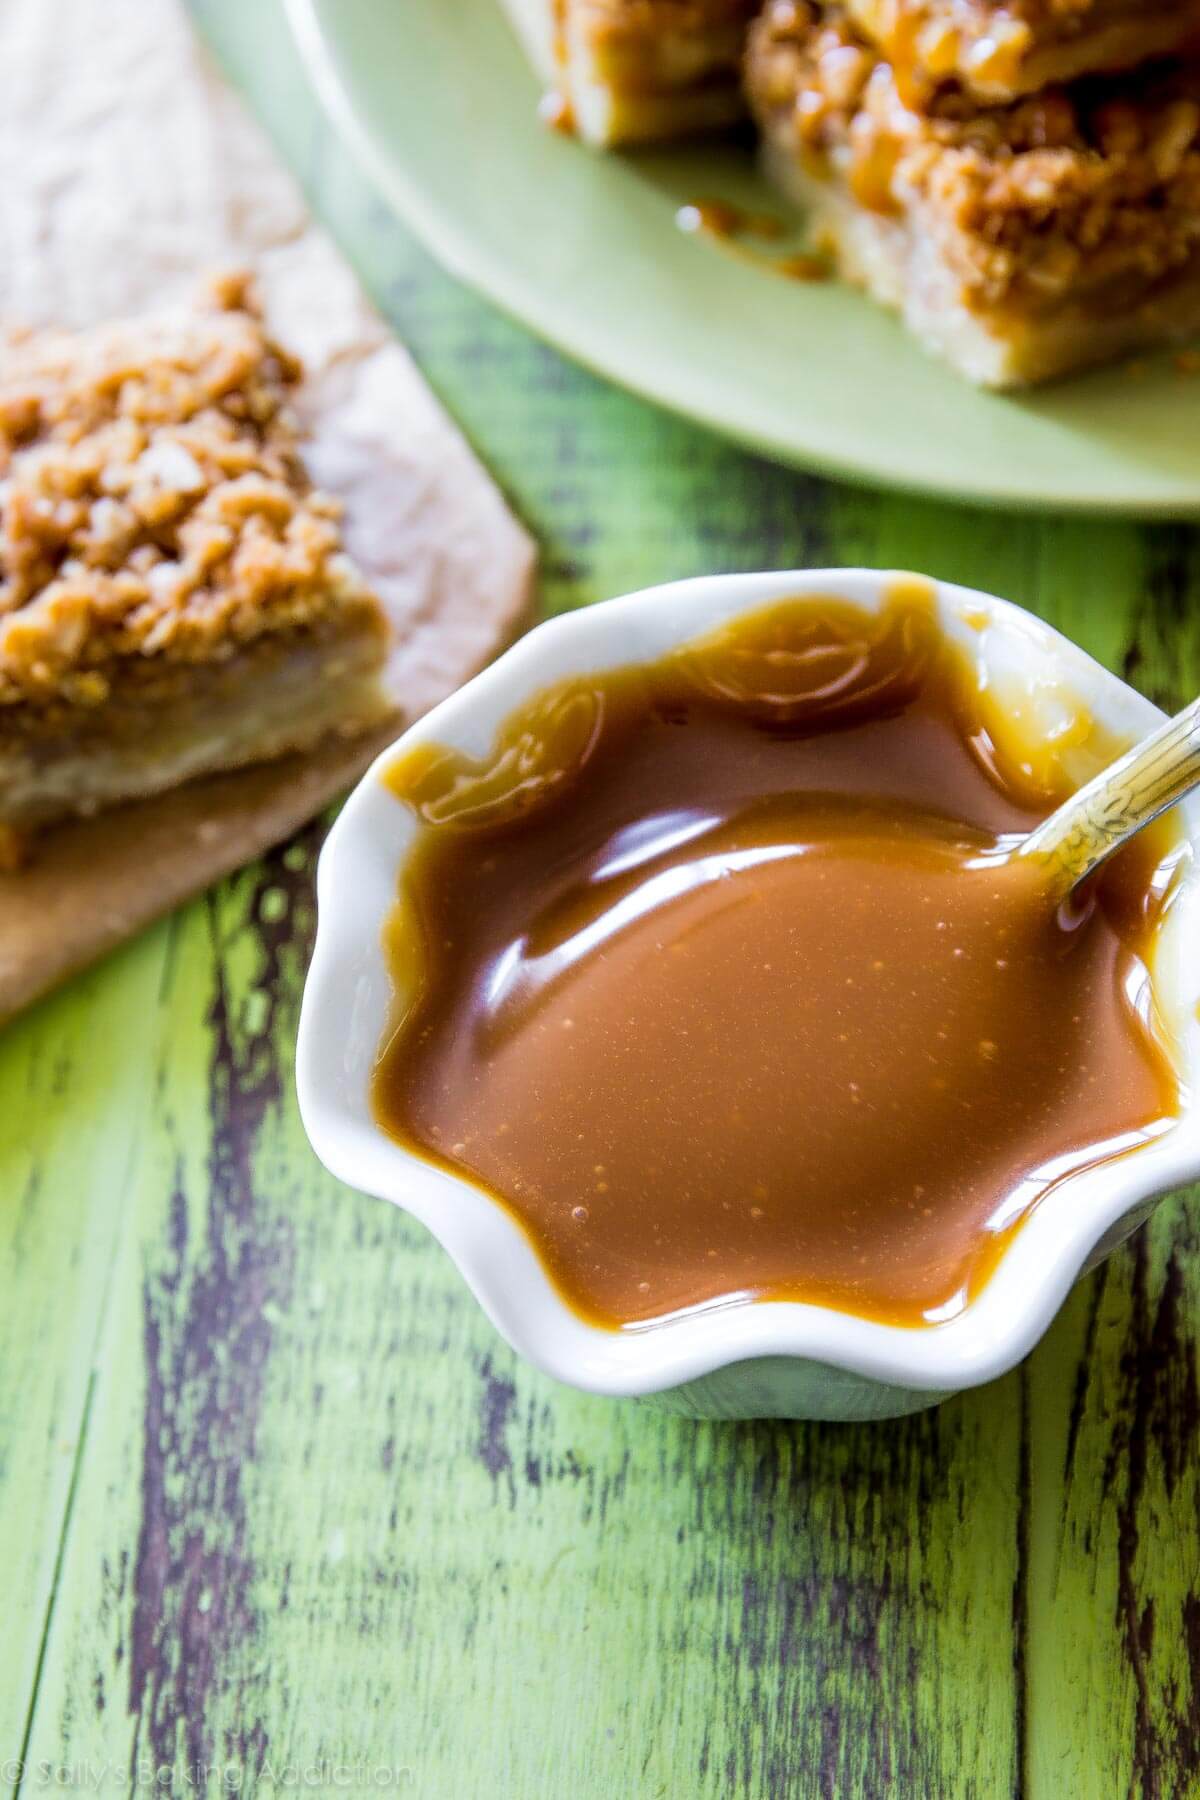 salted caramel sauce in a white bowl